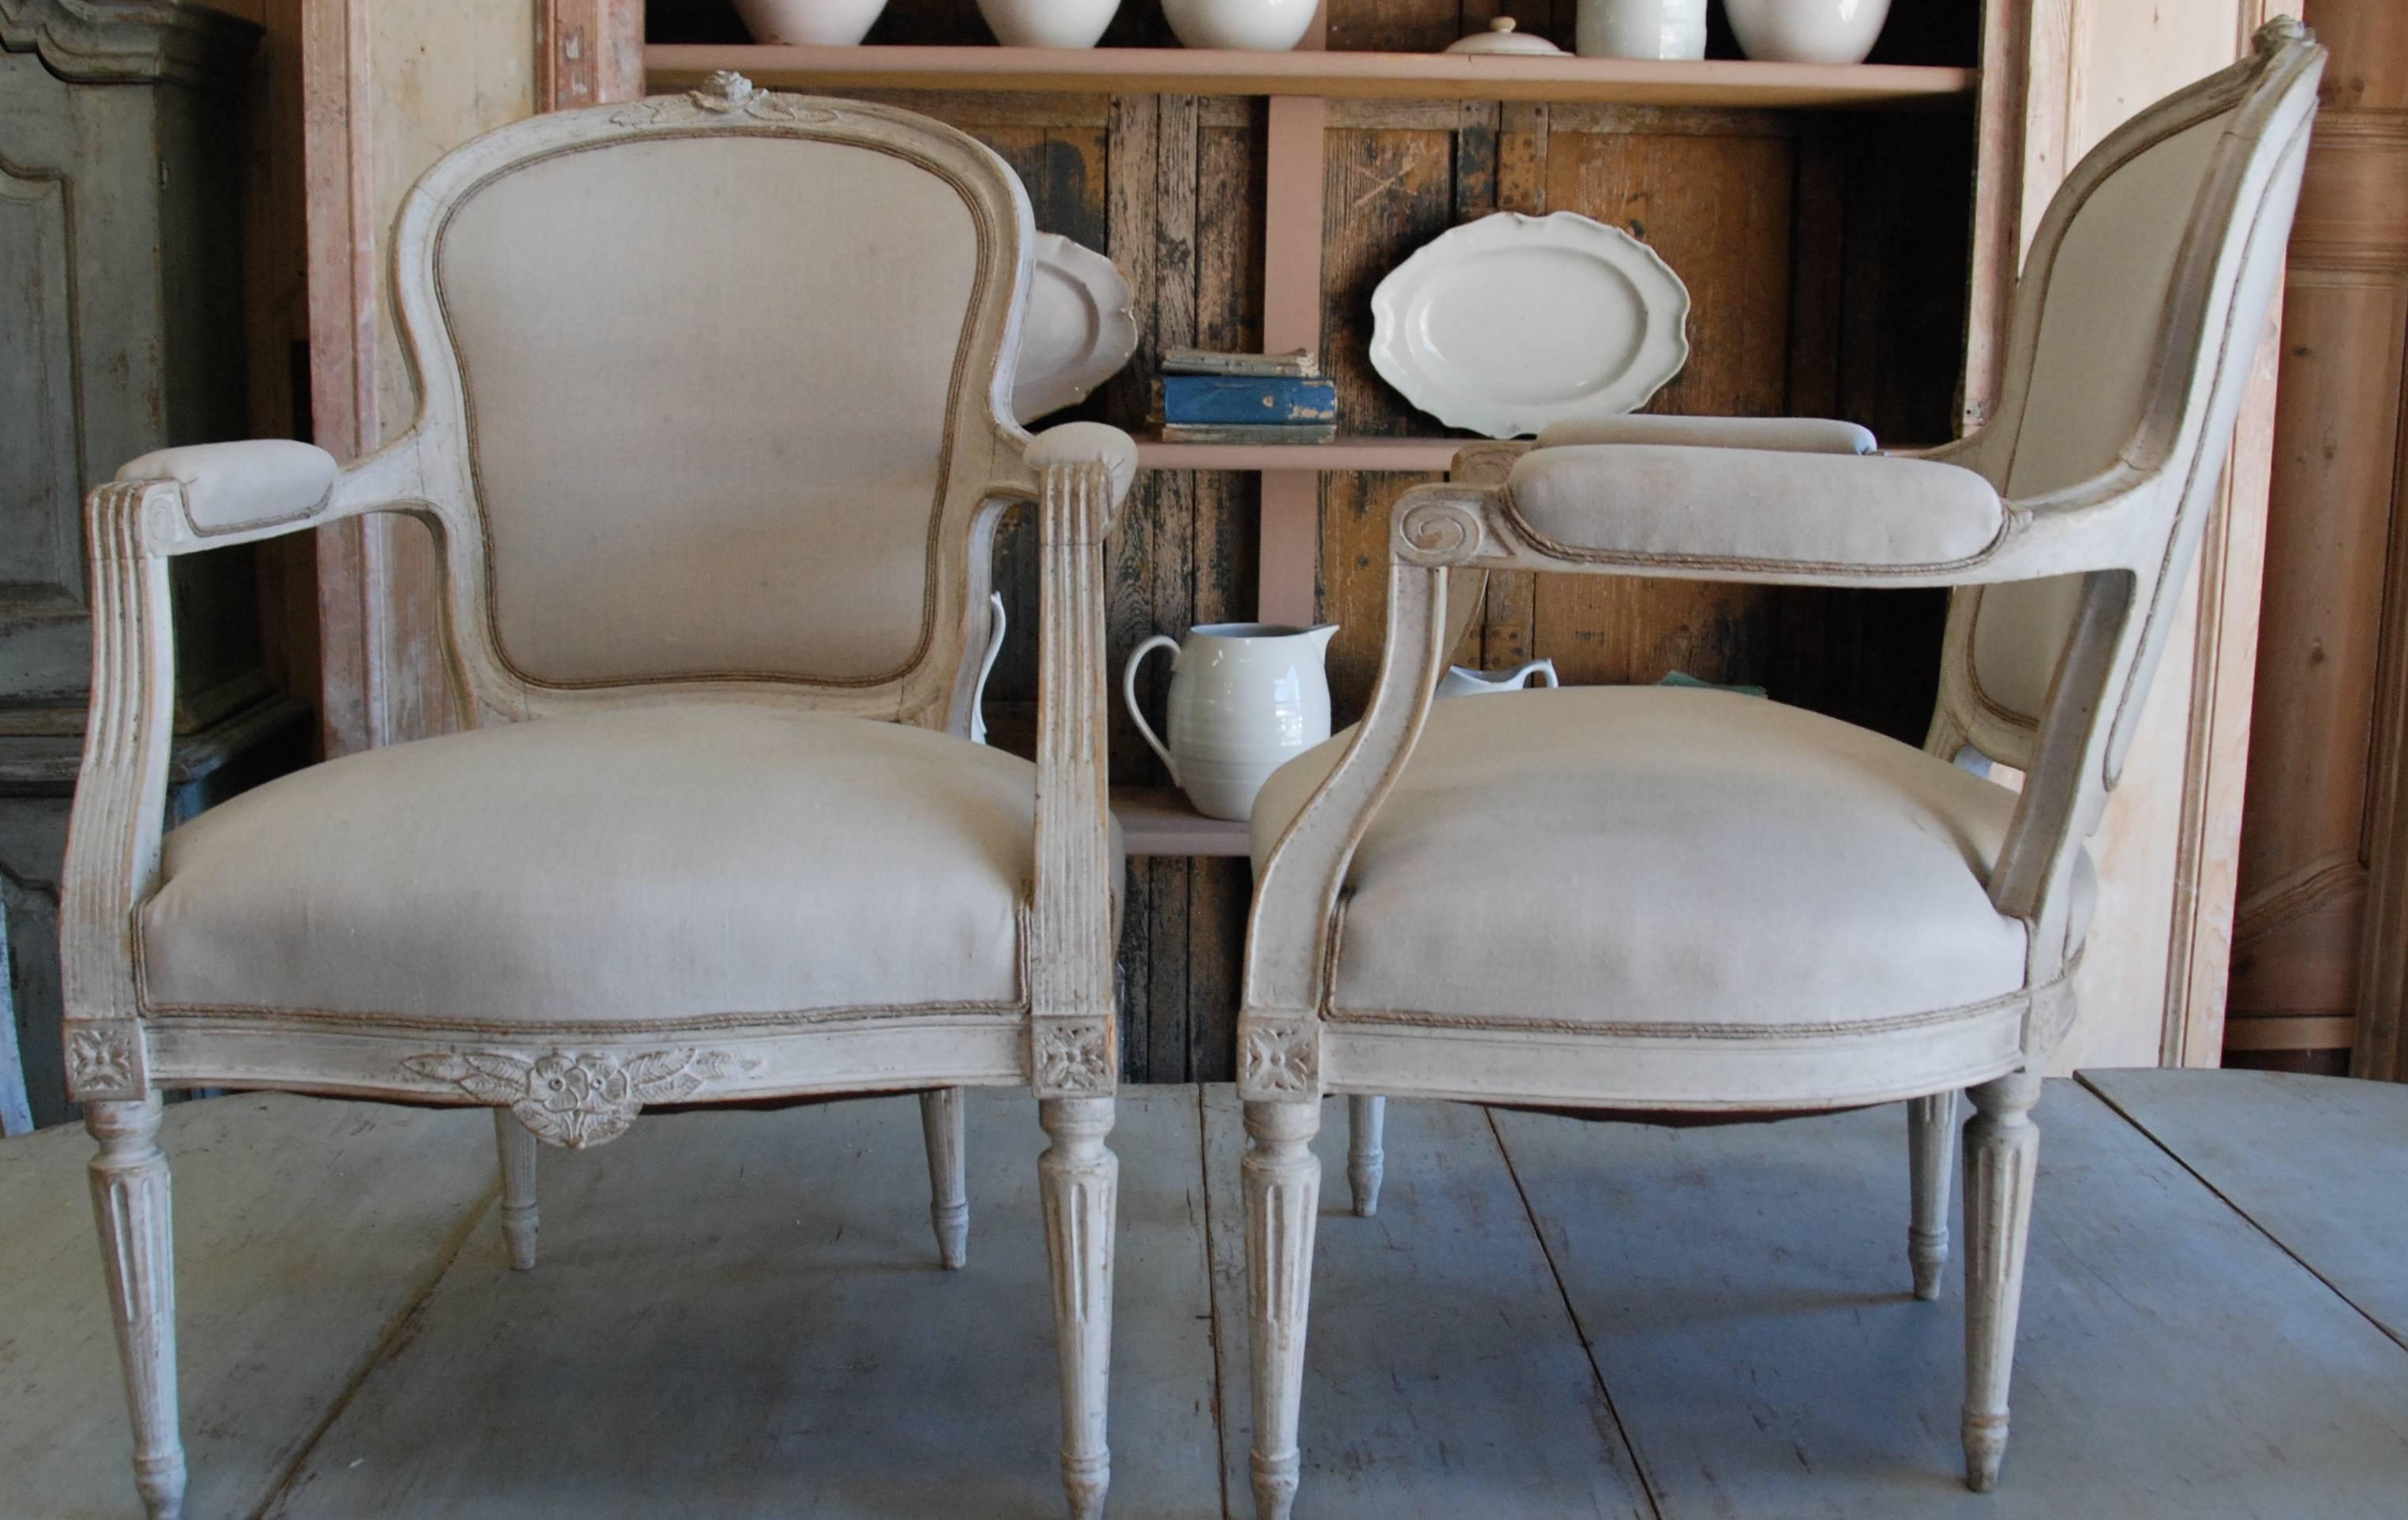 Pair of 19th century Swedish bergere chairs newly restored. Lovely cream color with carved legs and apron over fluted tapered legs.